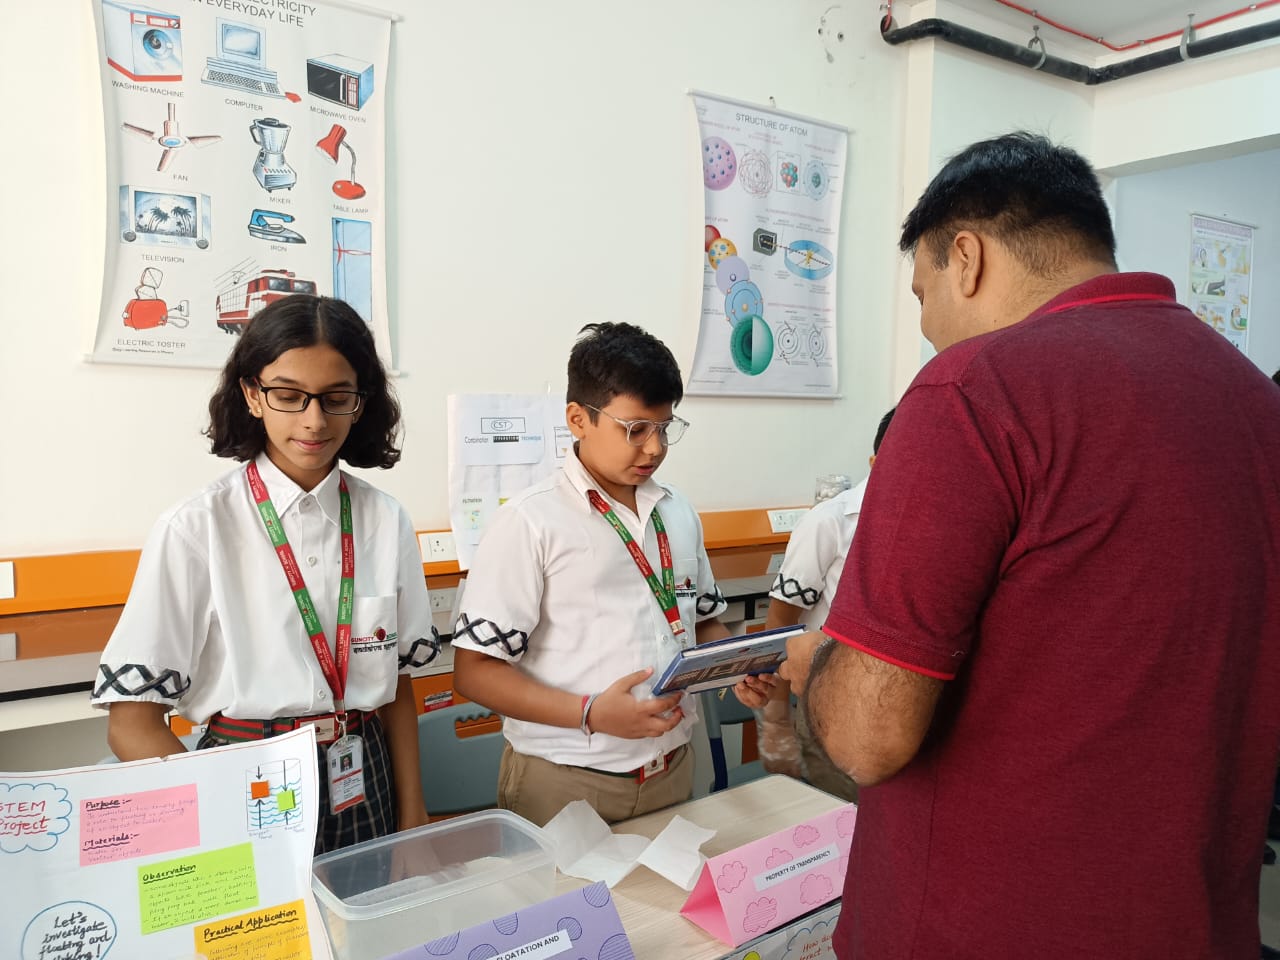 The Science Exhibition